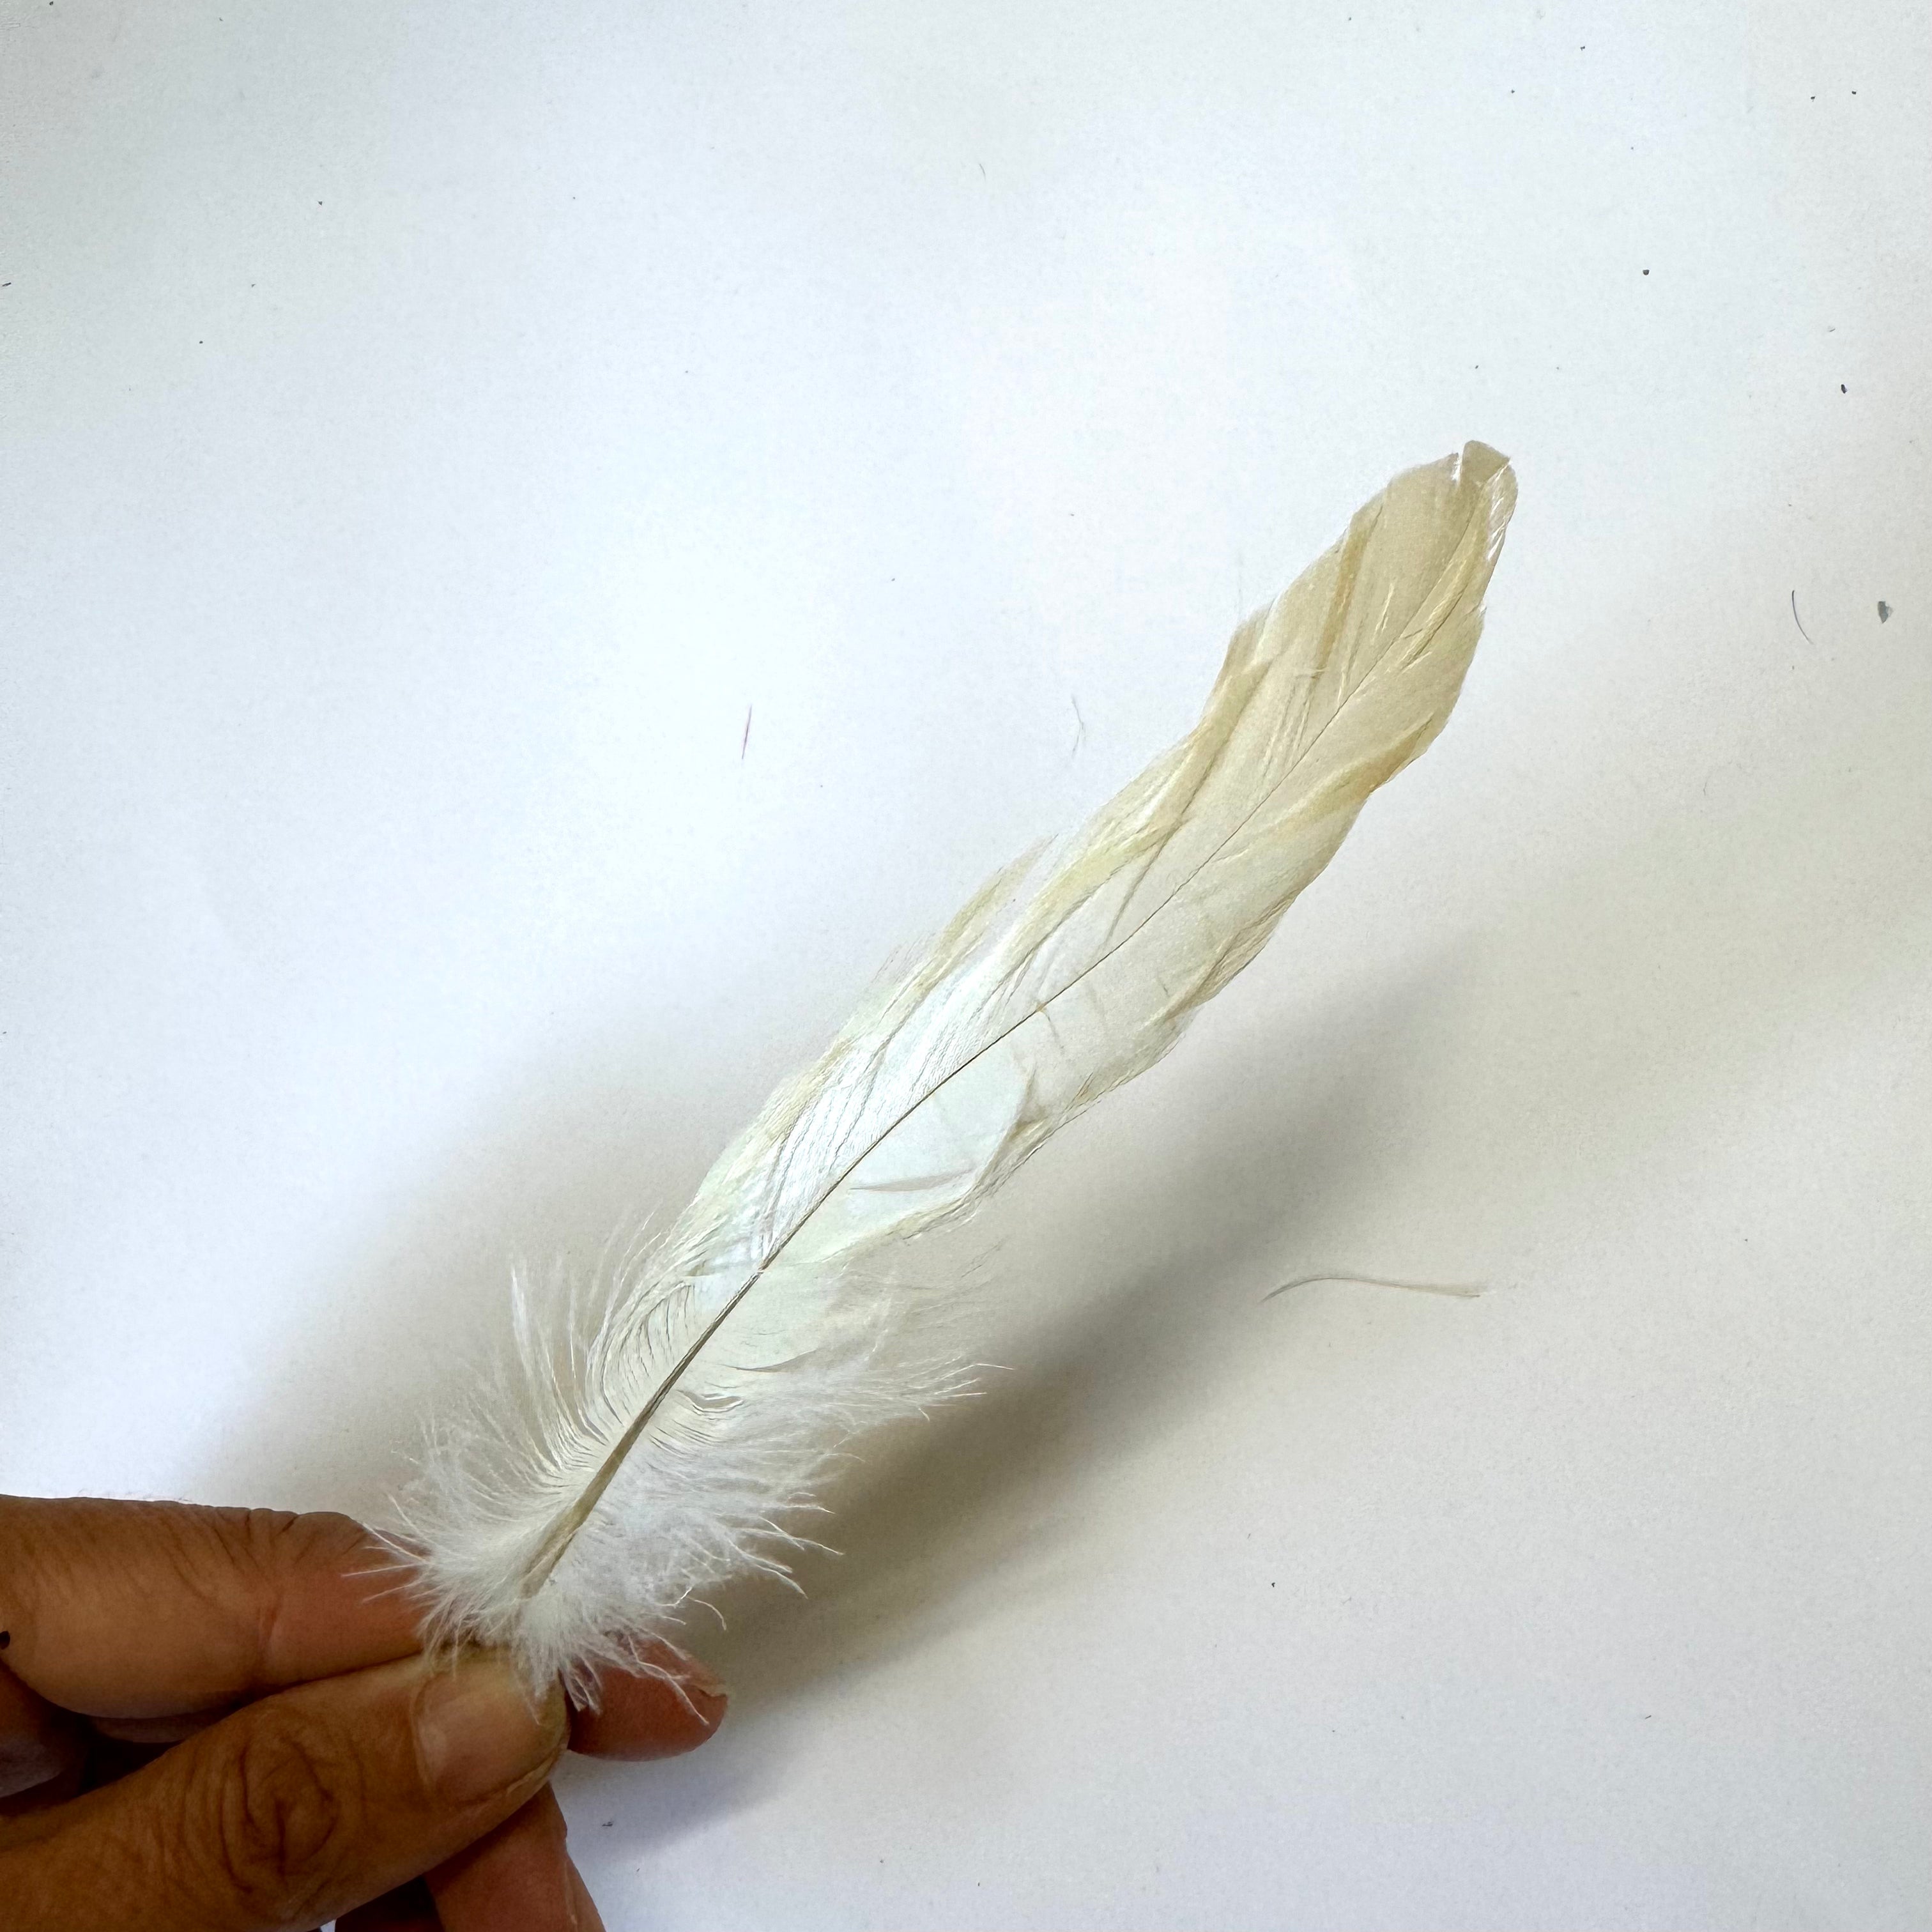 Coque Tail Feathers 6-8" 180mm - 10 grams - Beige